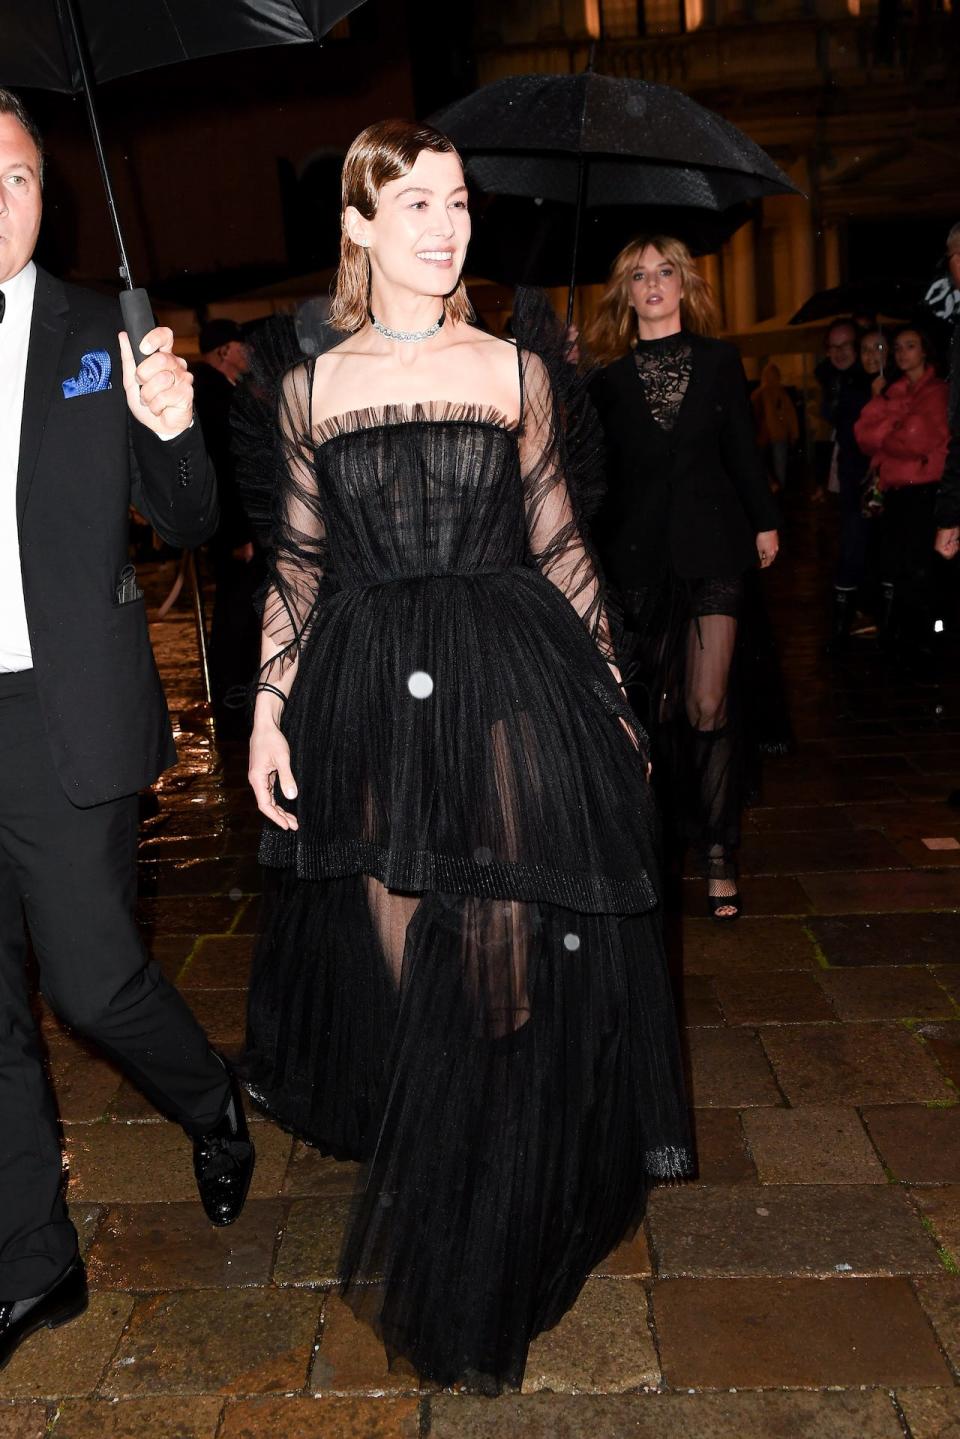 Rosamund Pike at a Dior event in Venice on April 23, 2022 in Venice, Italy.